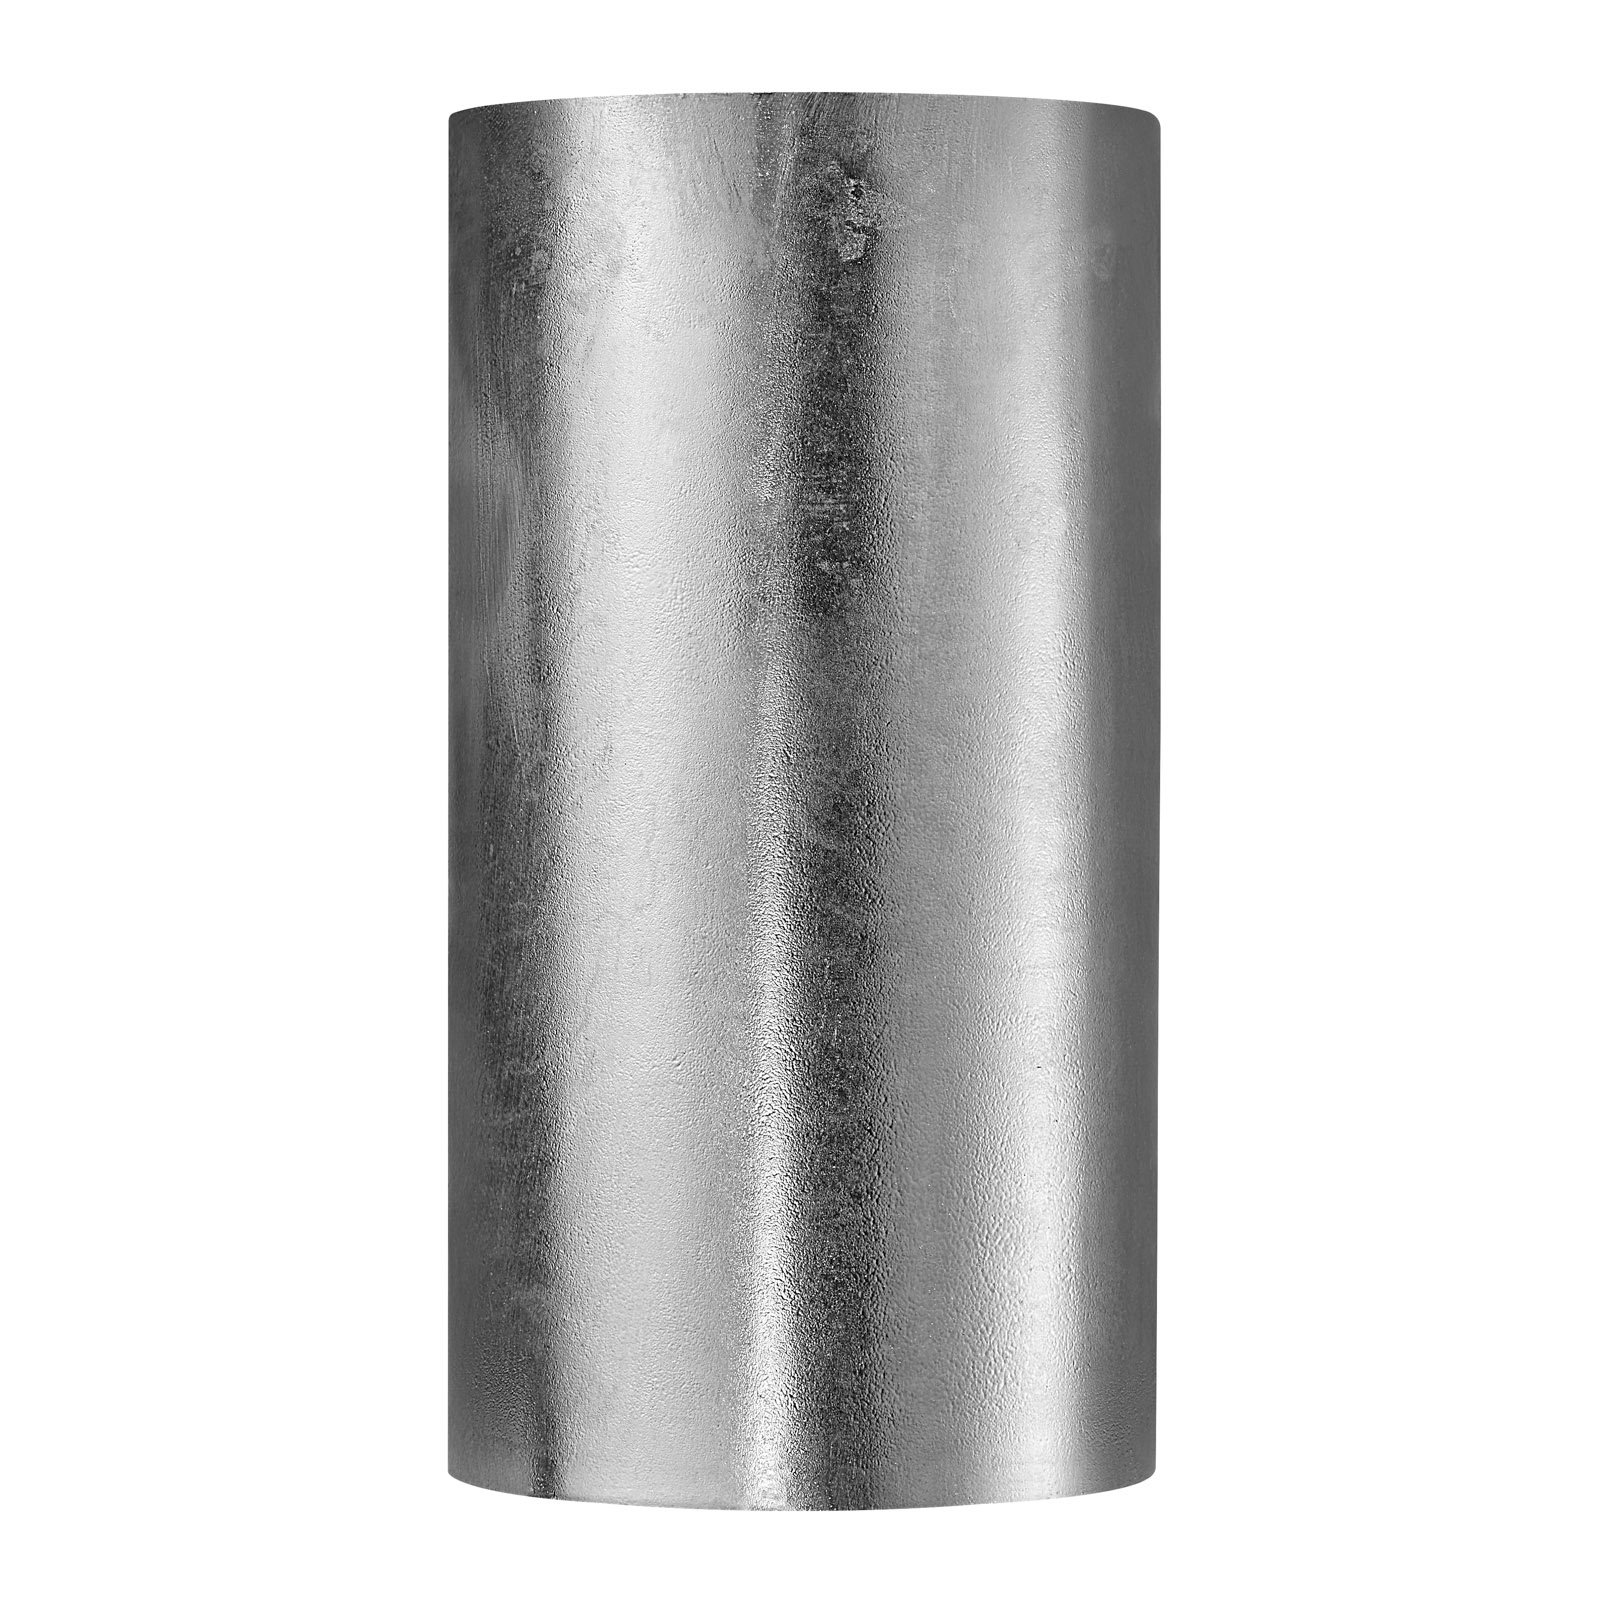 Canto Maxi 2 outdoor wall light, galvanised